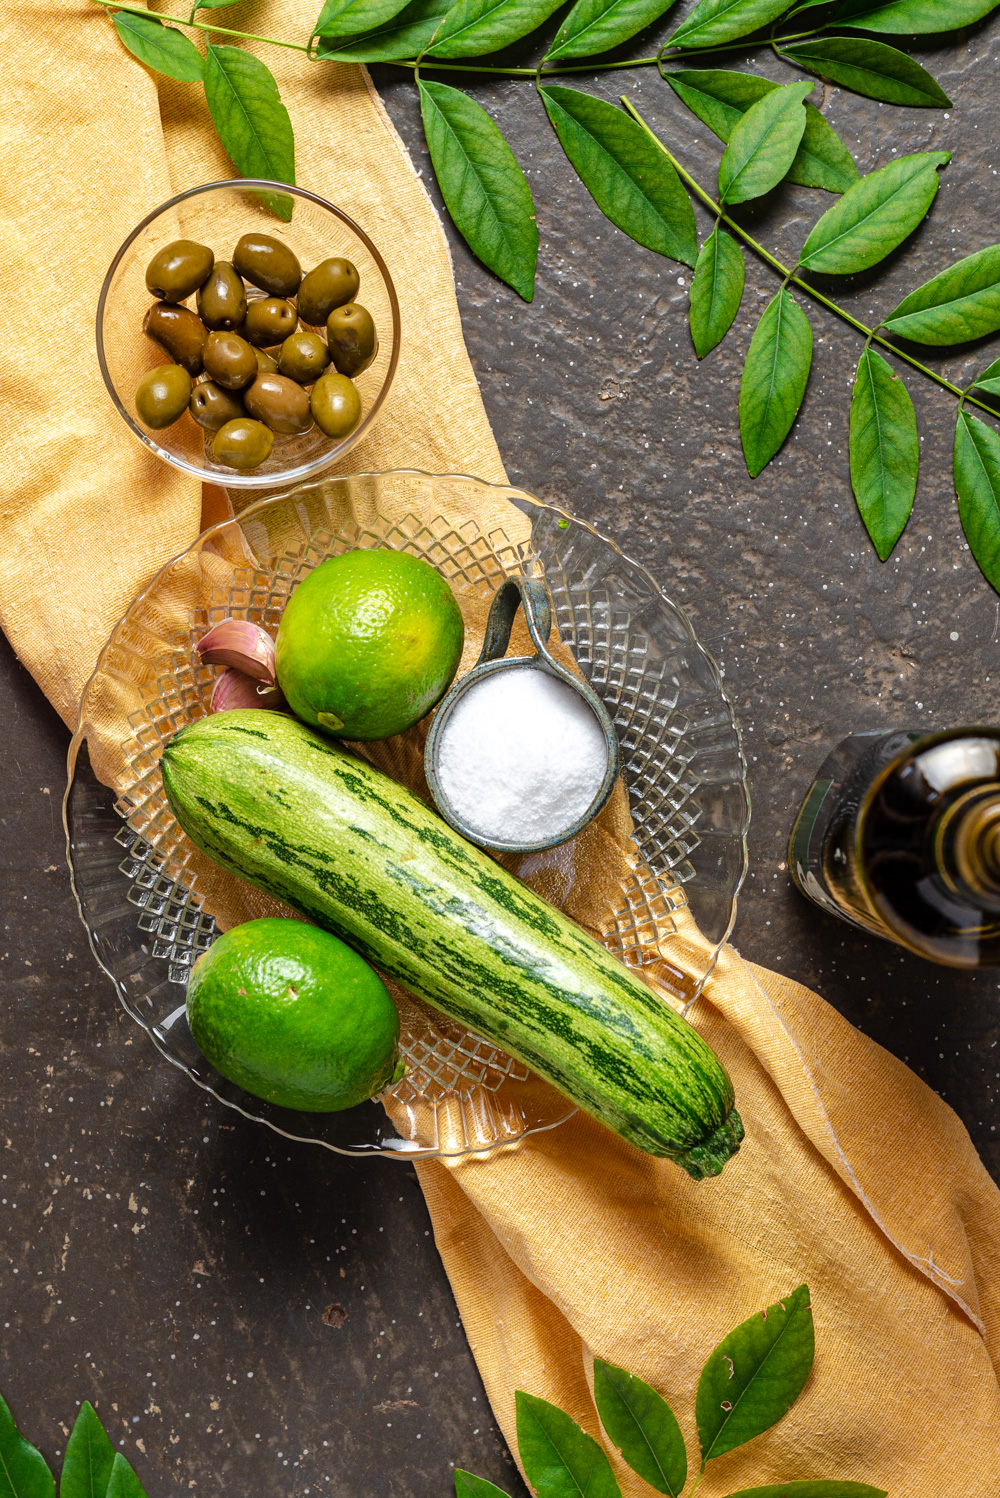 zucchini, salt, limes, olives and olive oil on a table